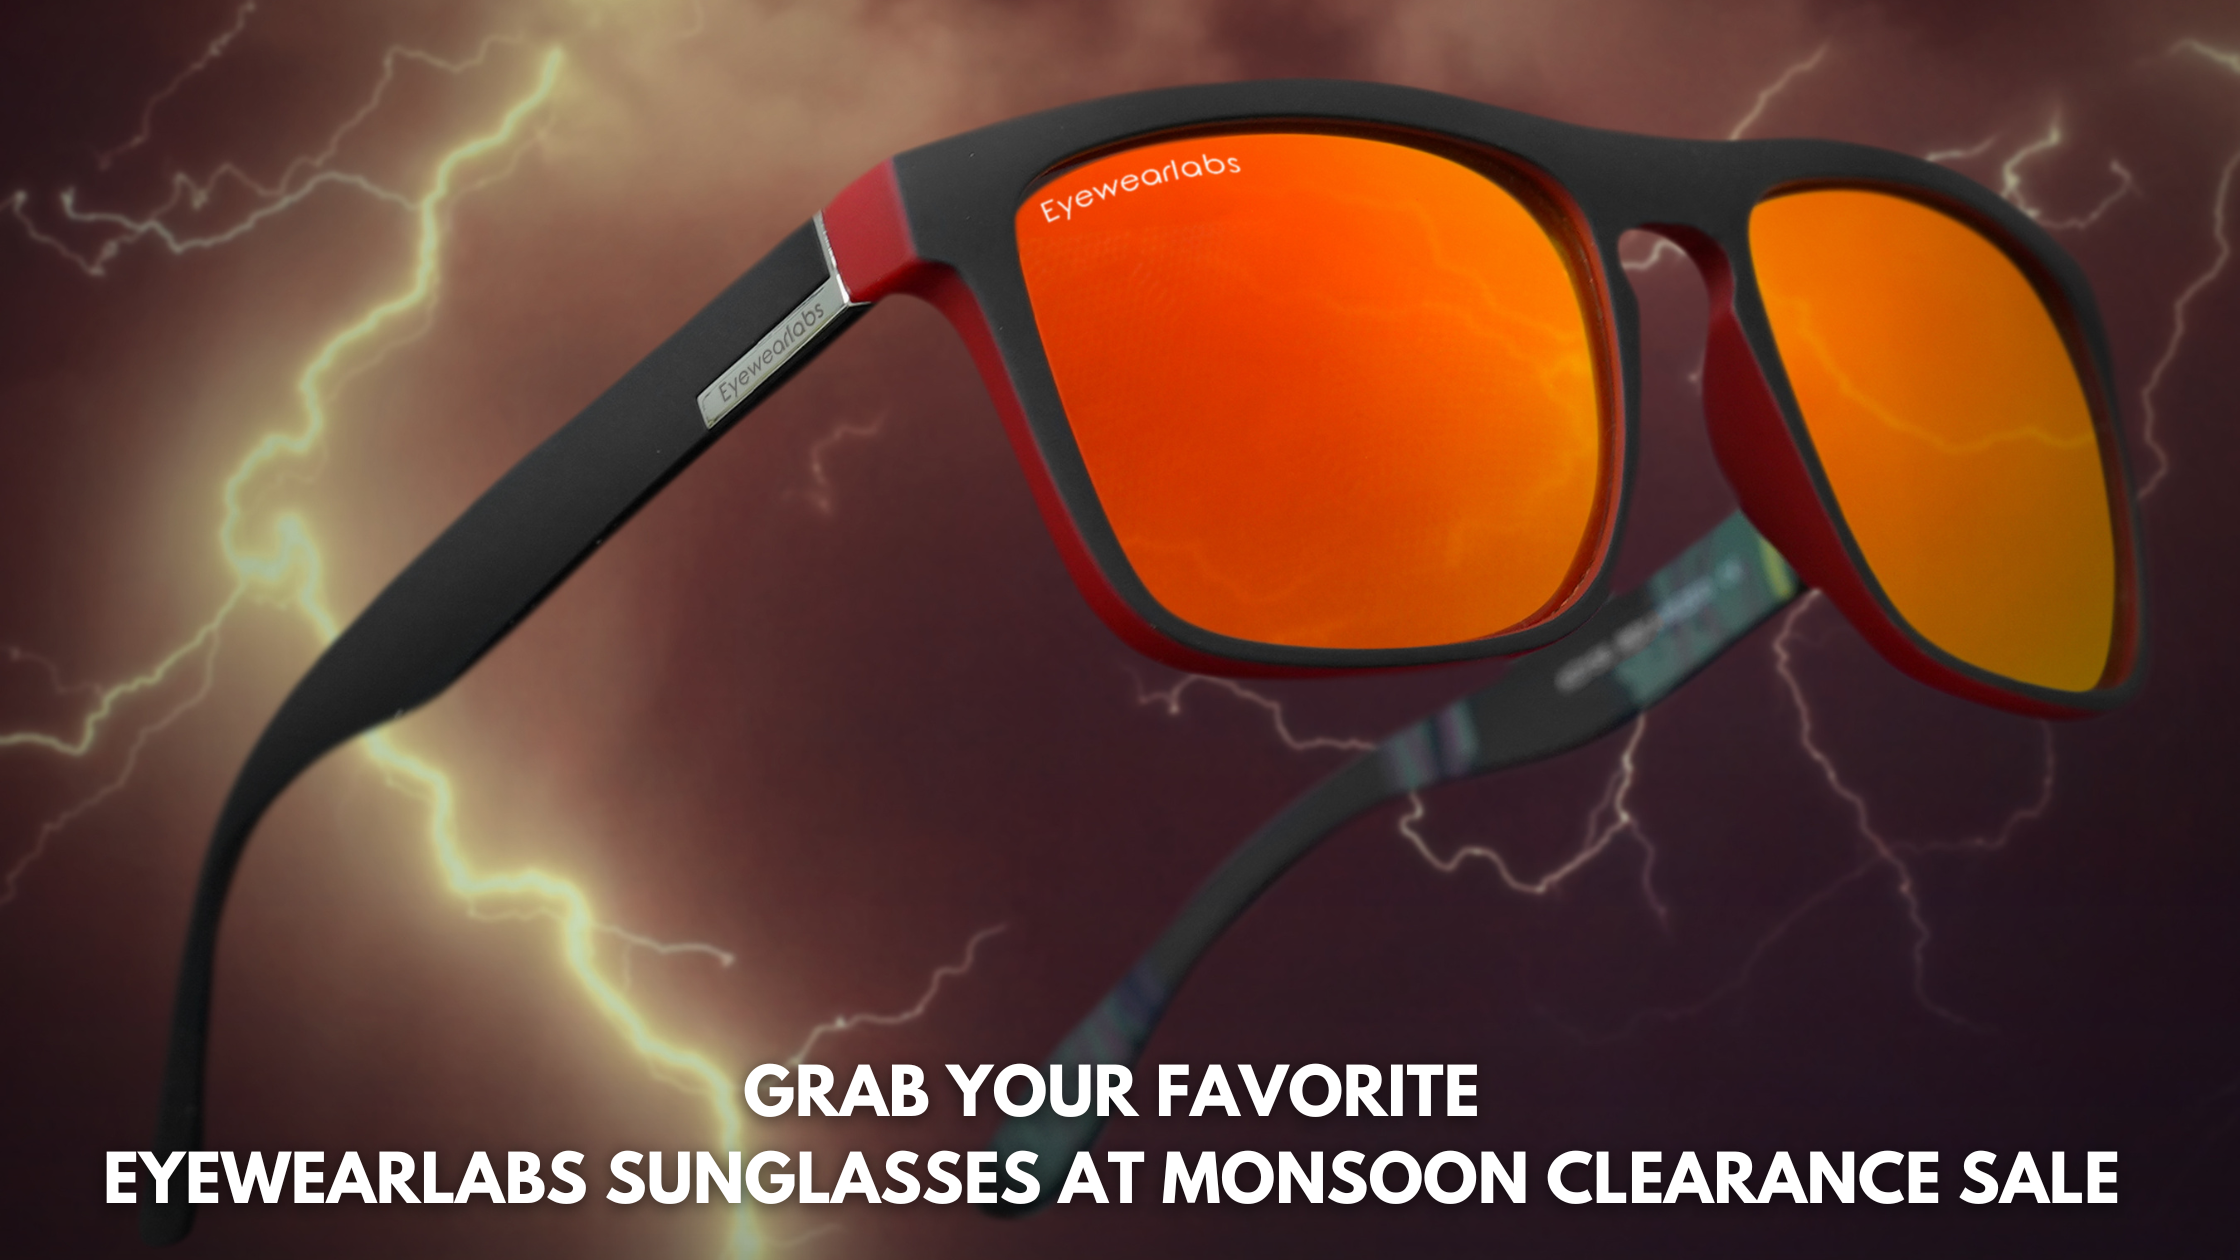 Grab Your Favorite Eyewearlabs Sunglasses at Monsoon Clearance Sale